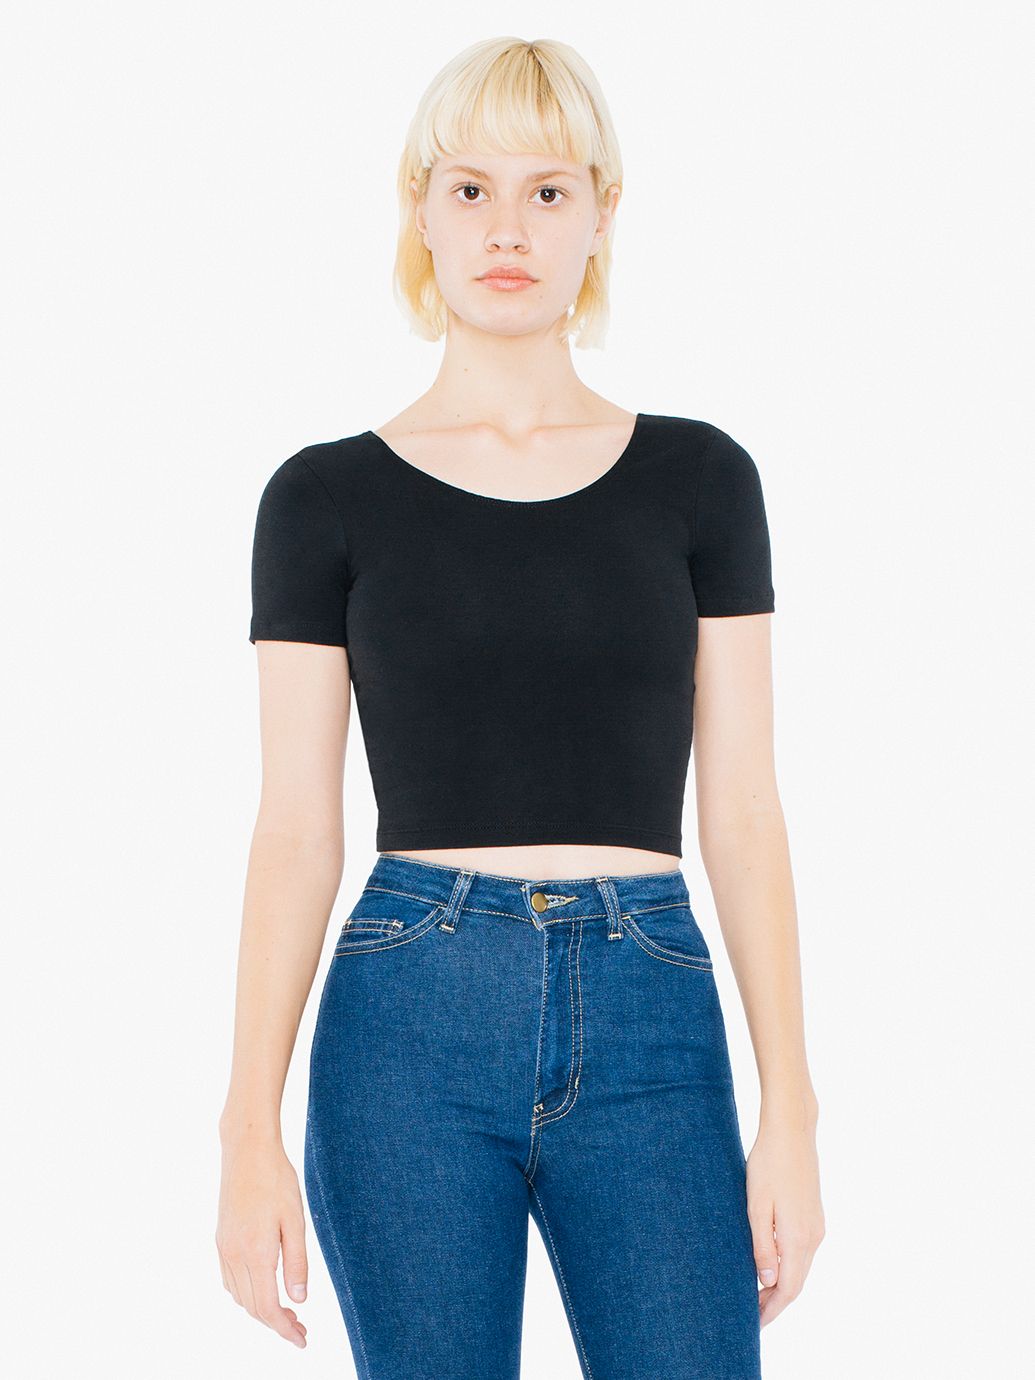 AMA T-shirt Crop Cot/Spandex For Her